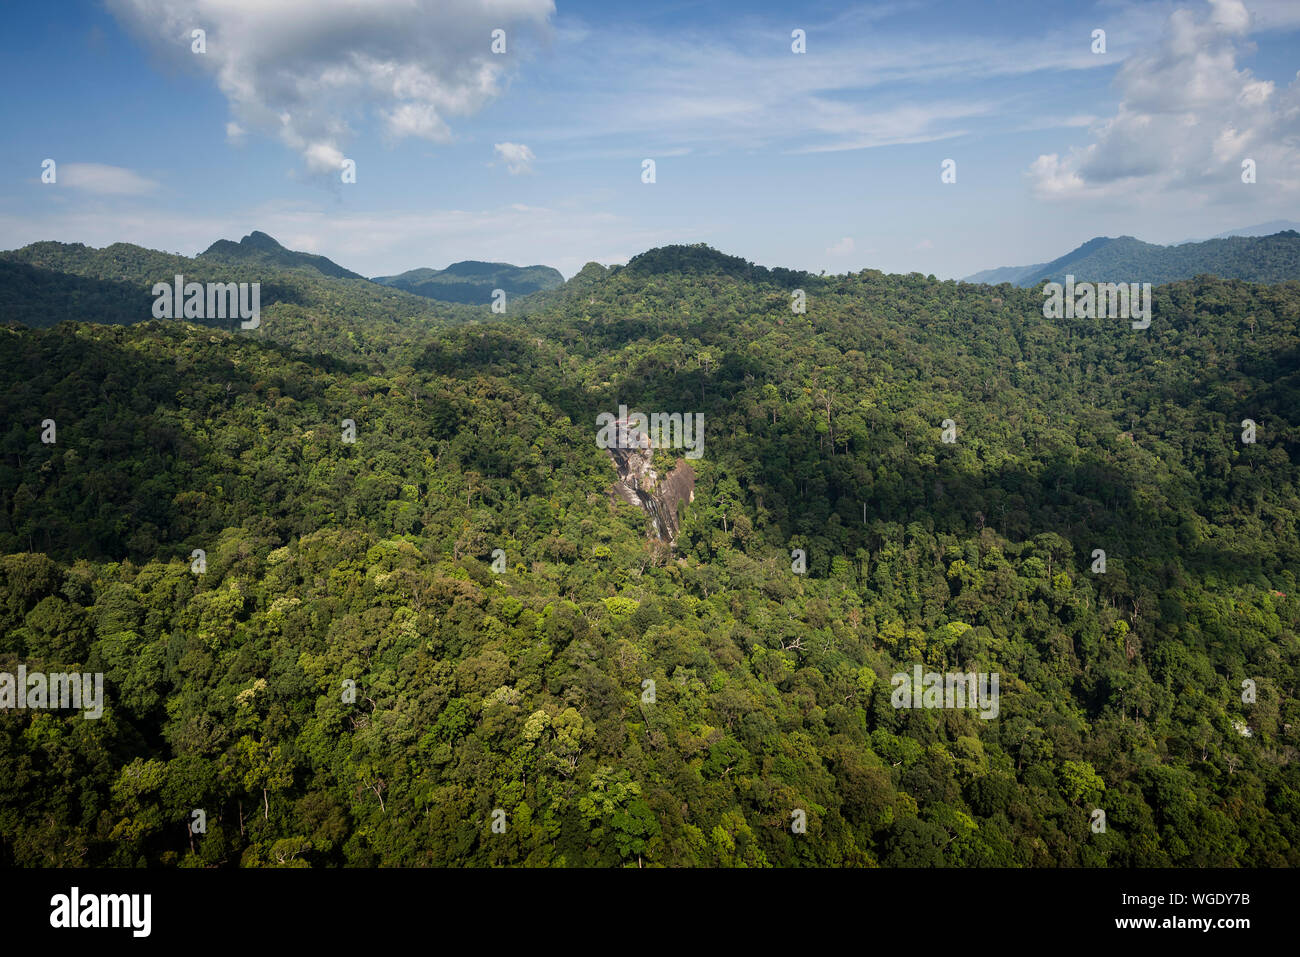 Rainforest Machincang mountain of Langkawi Island, Malaysia - The landscape of mountain view of Langkawi seen from cable car viewpoint, Langkawi, Mala Stock Photo